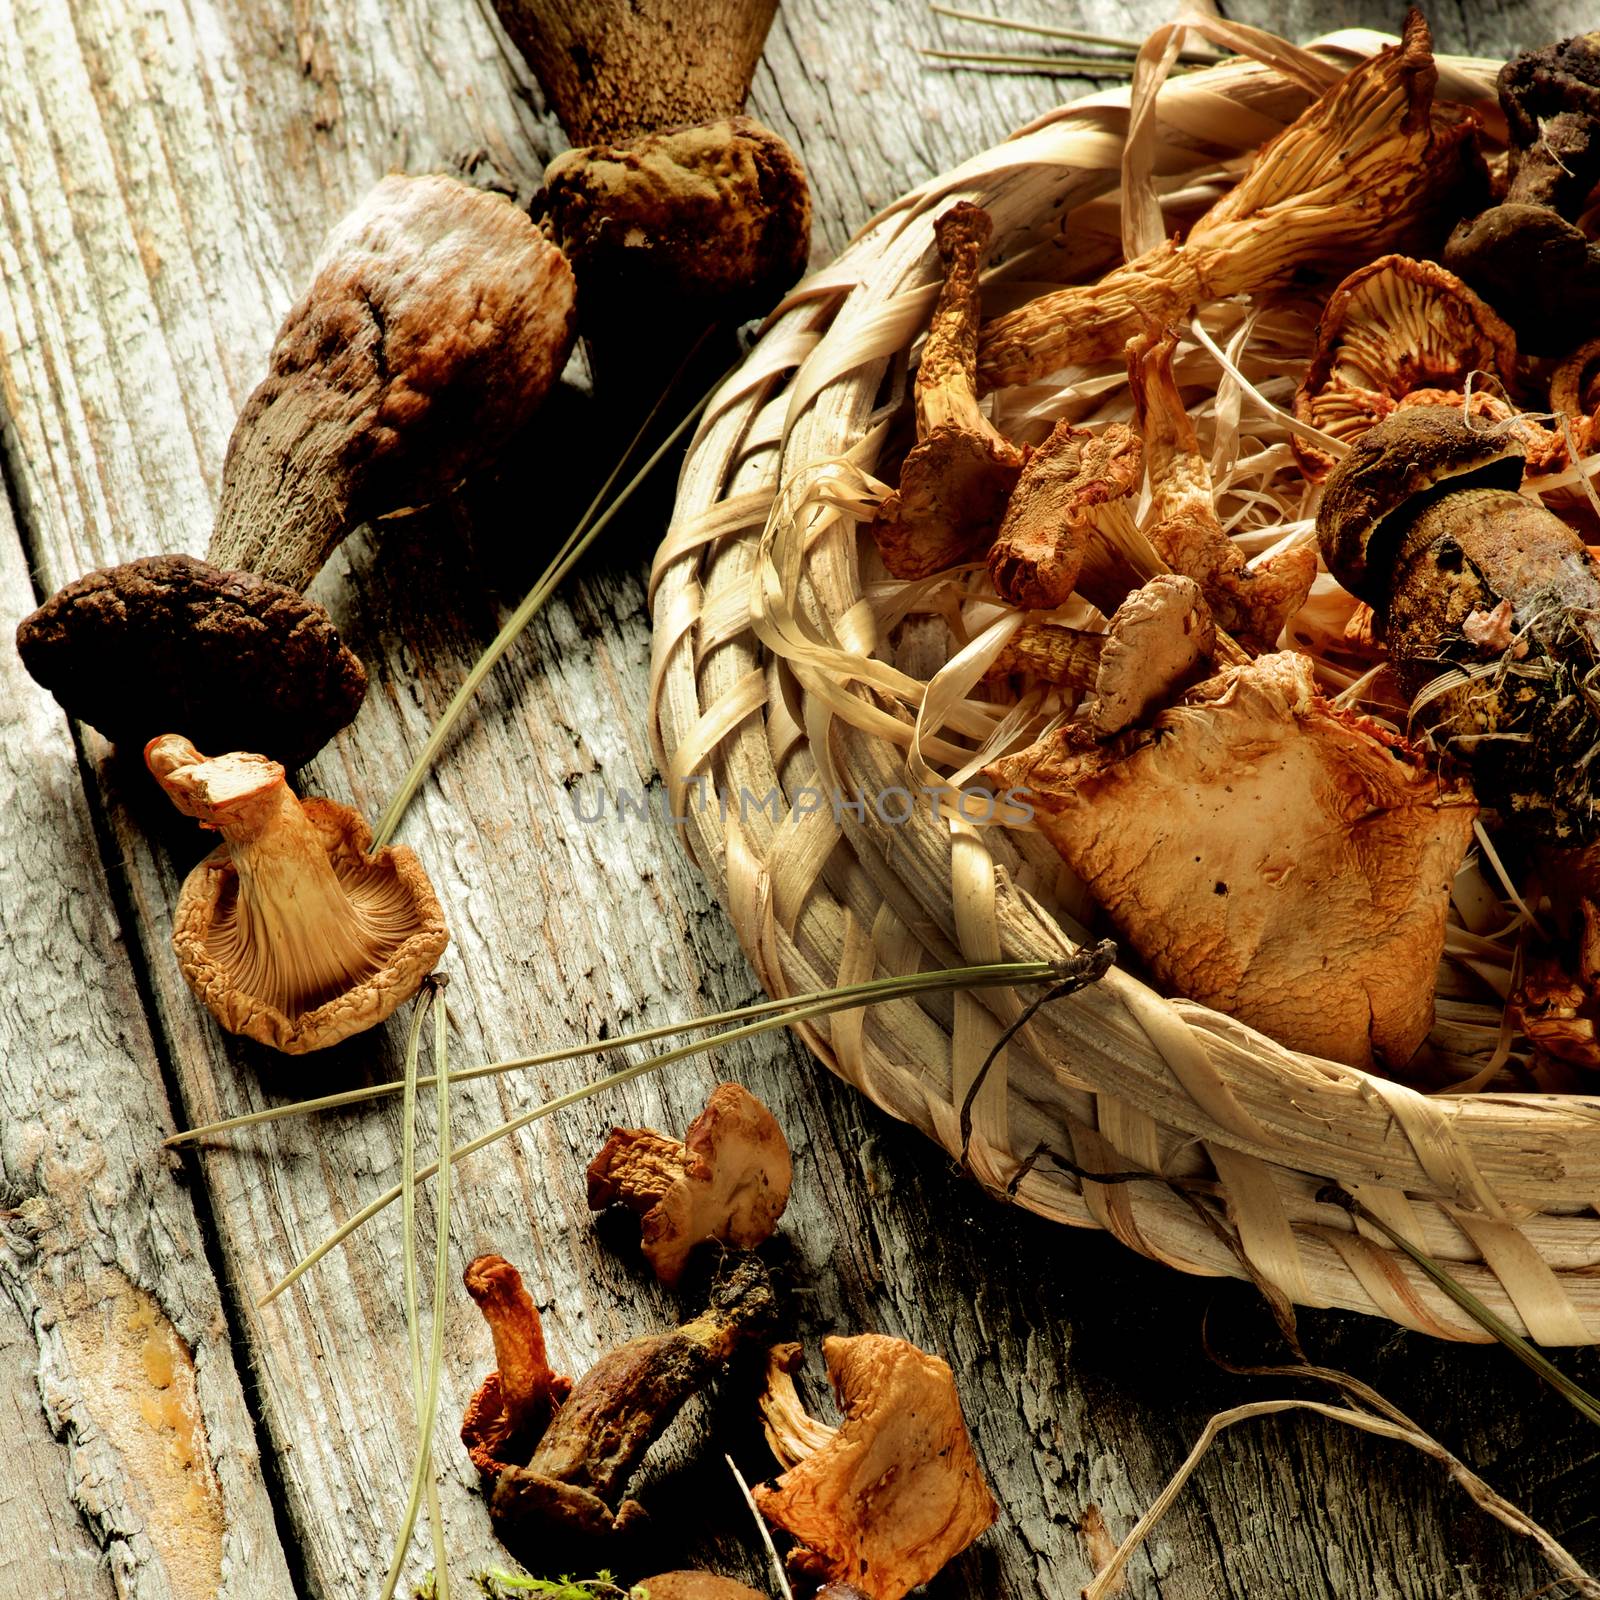 Forest Dried Mushrooms with Chanterelles, Porcini and Dry Stems in Wicker Scoop closeup Rustic Wooden background